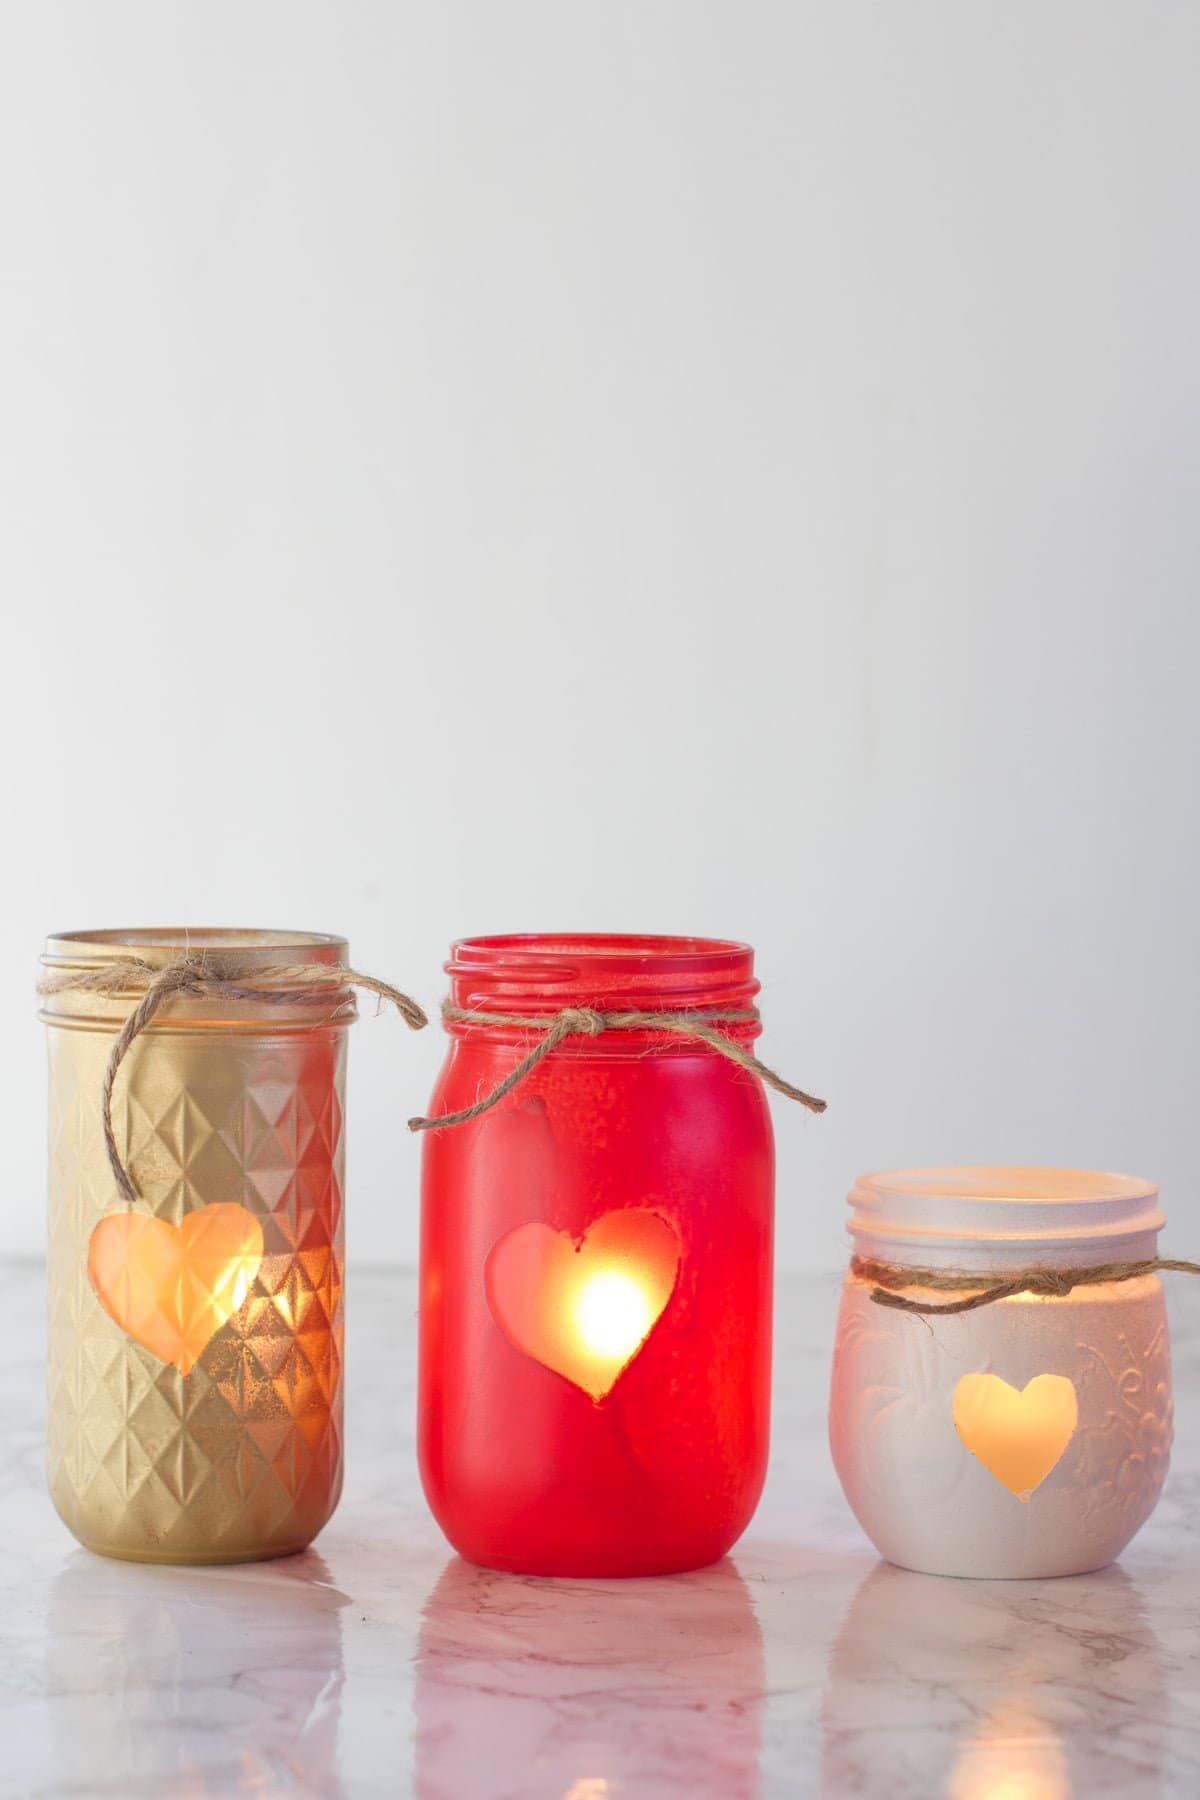 Three Painted Mason Jar Votive Holders, each with a heart and a piece of twine. The jars are gold, red, and white.